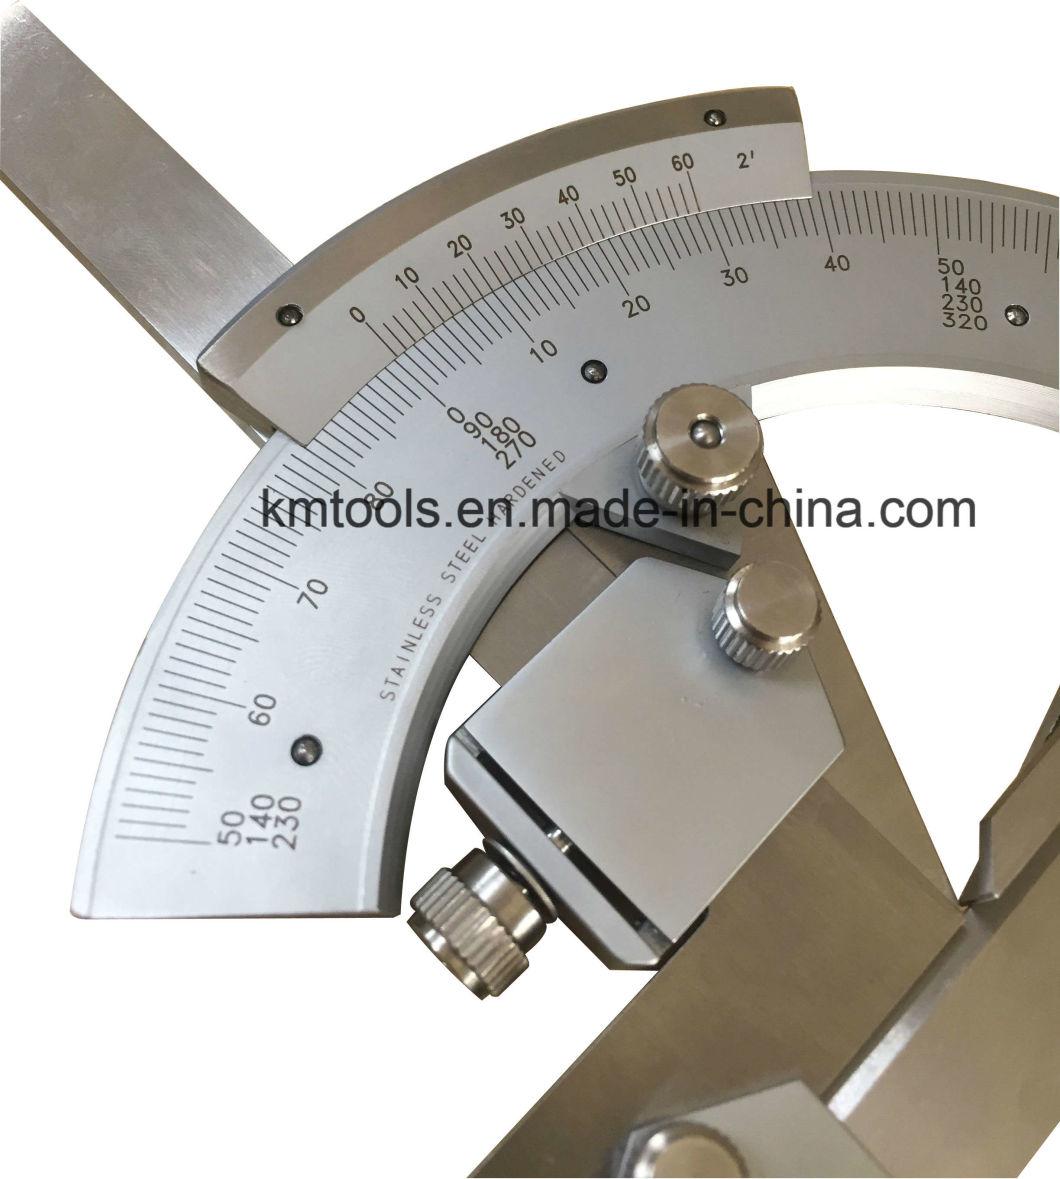 High Quality 0-320 Degree Stainless Steel Vernier Protractor